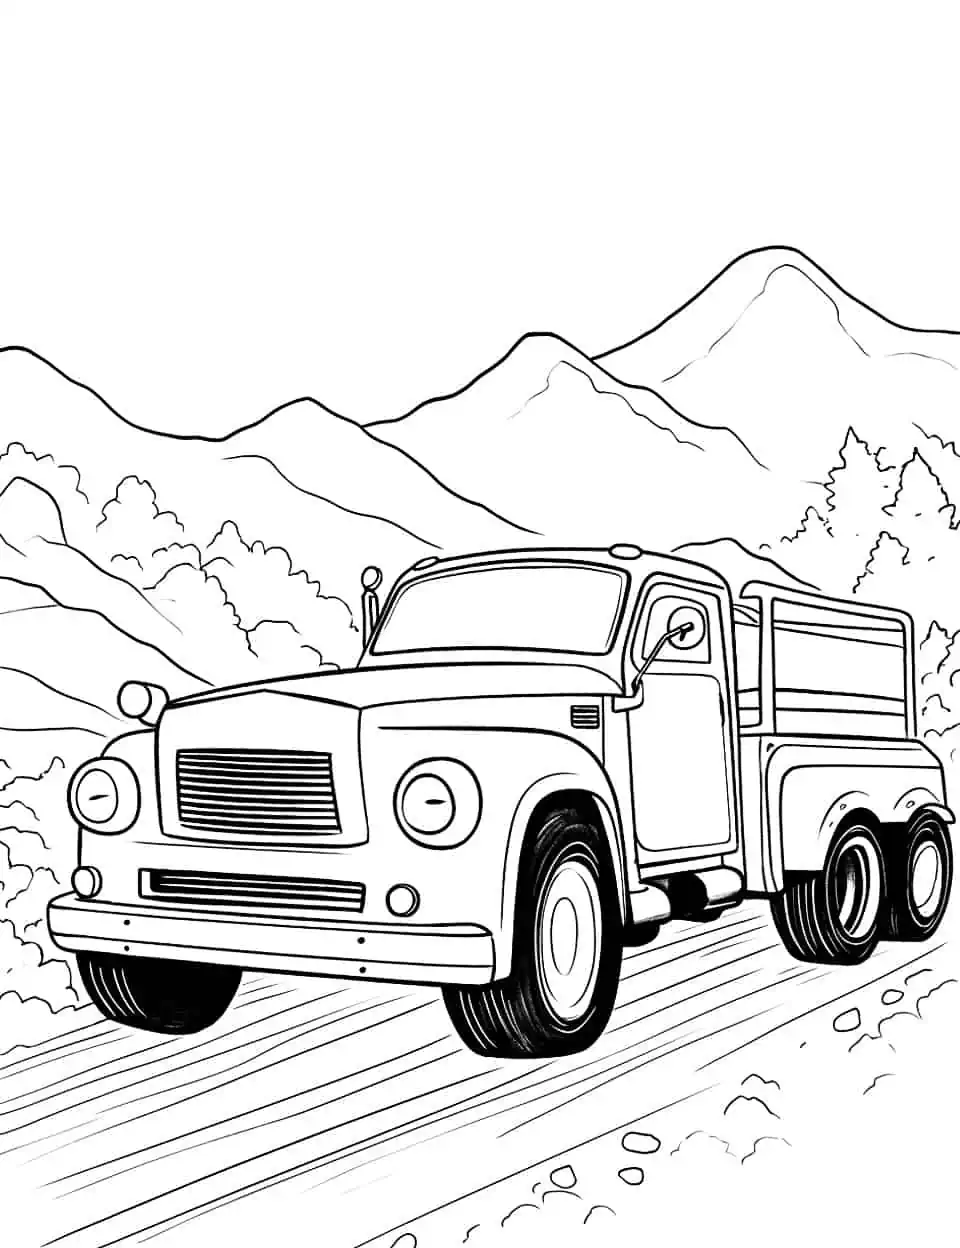 Large and In Charge Car Coloring Page - A big, powerful truck barreling down a dirt road.